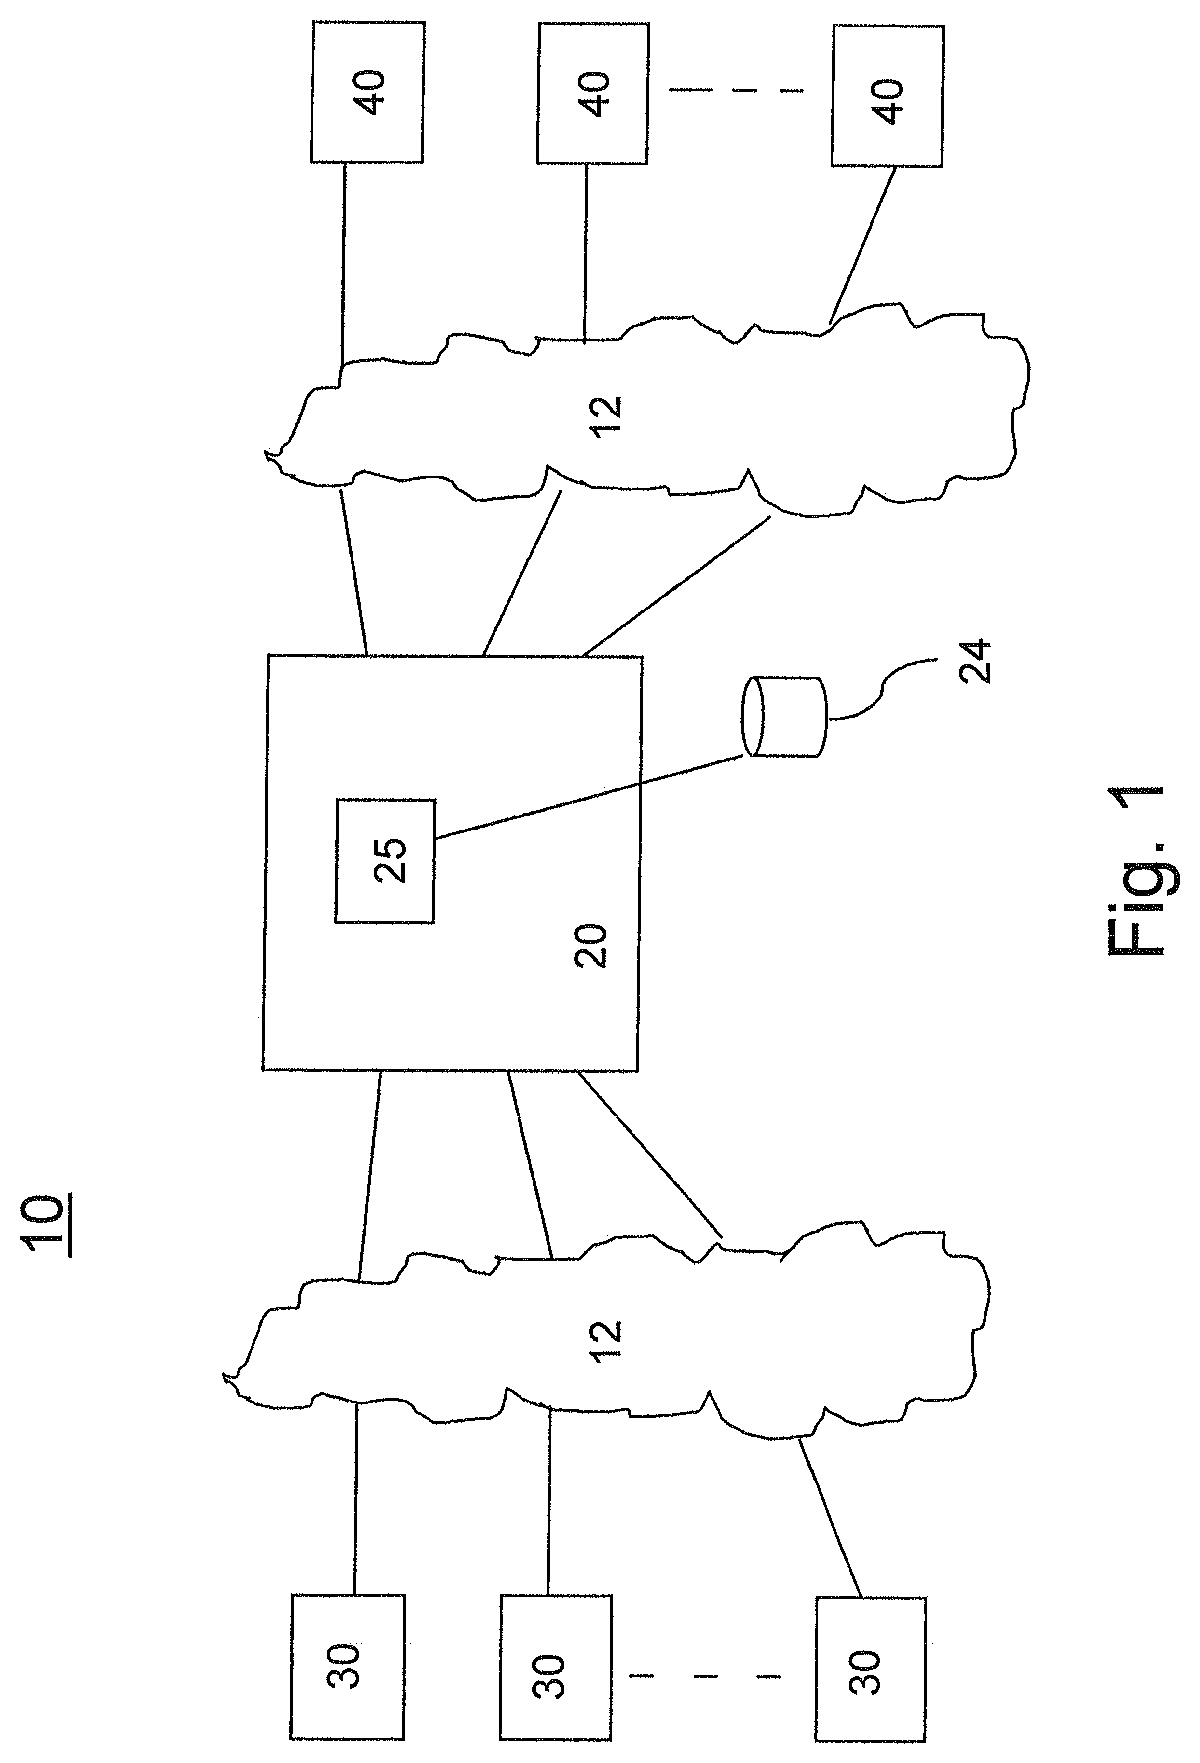 Electronic physician referral management system and methods